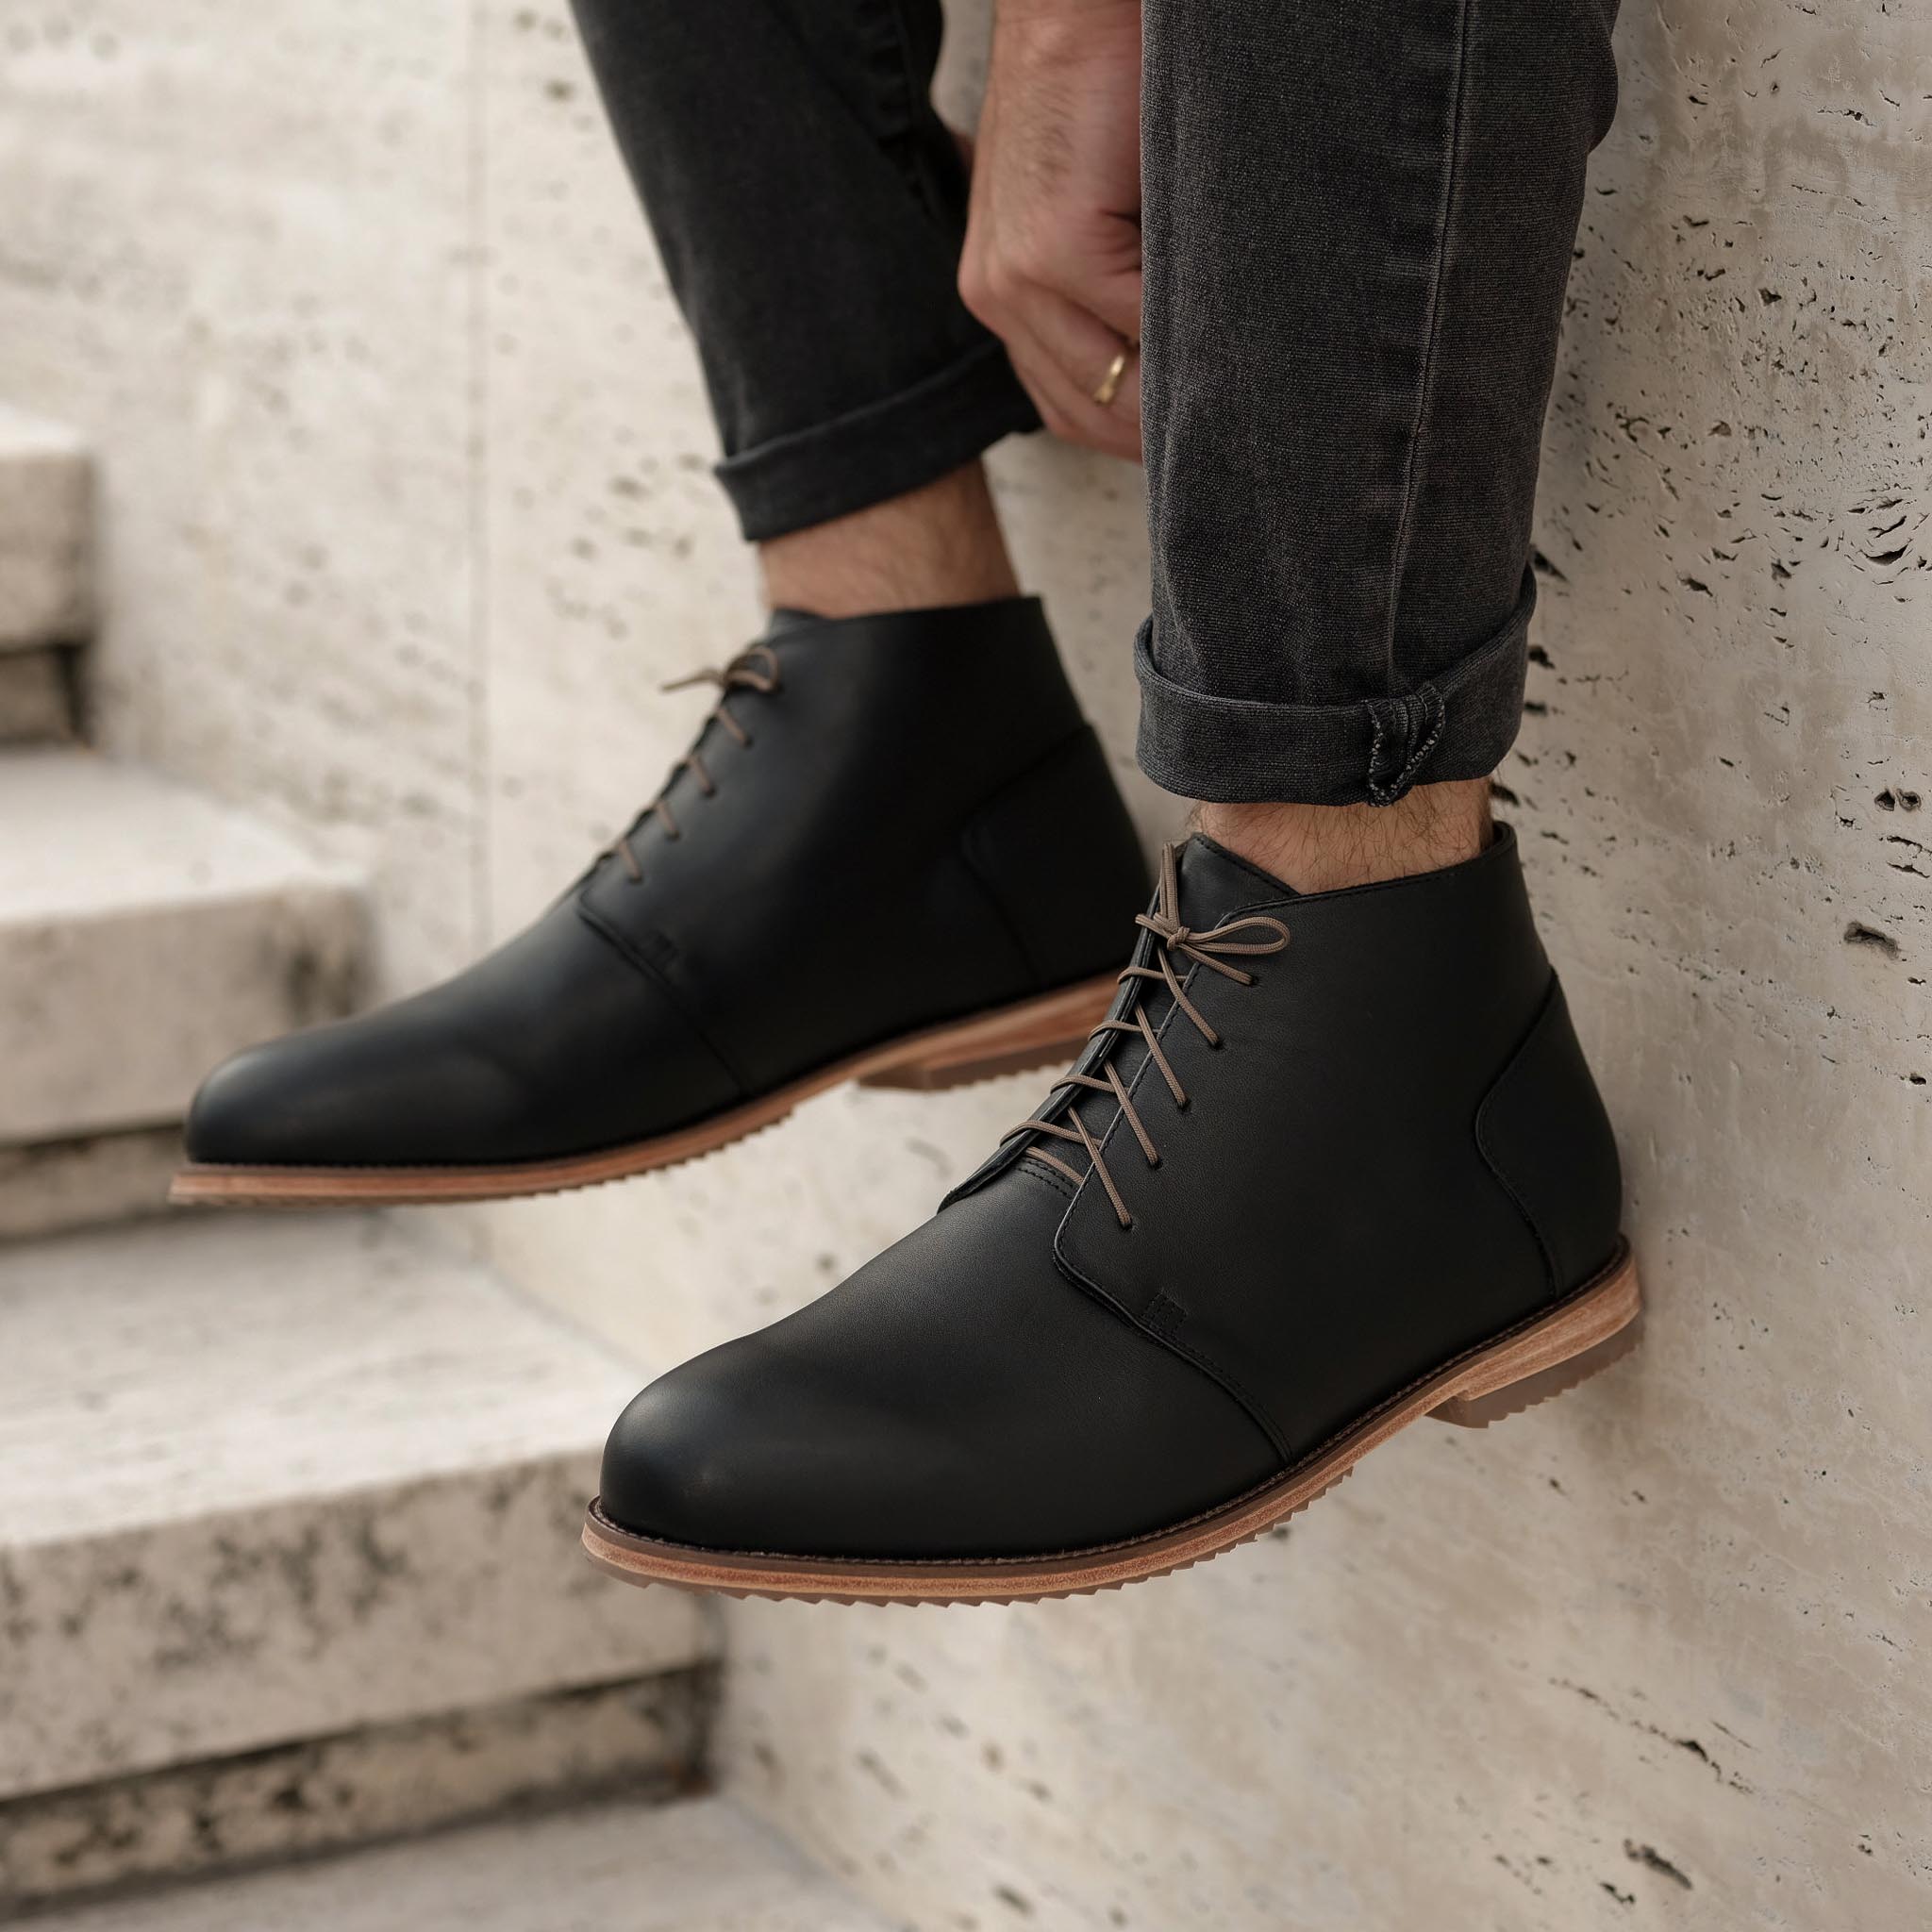 Image 1 of the Everyday Chukka Boot Black on model